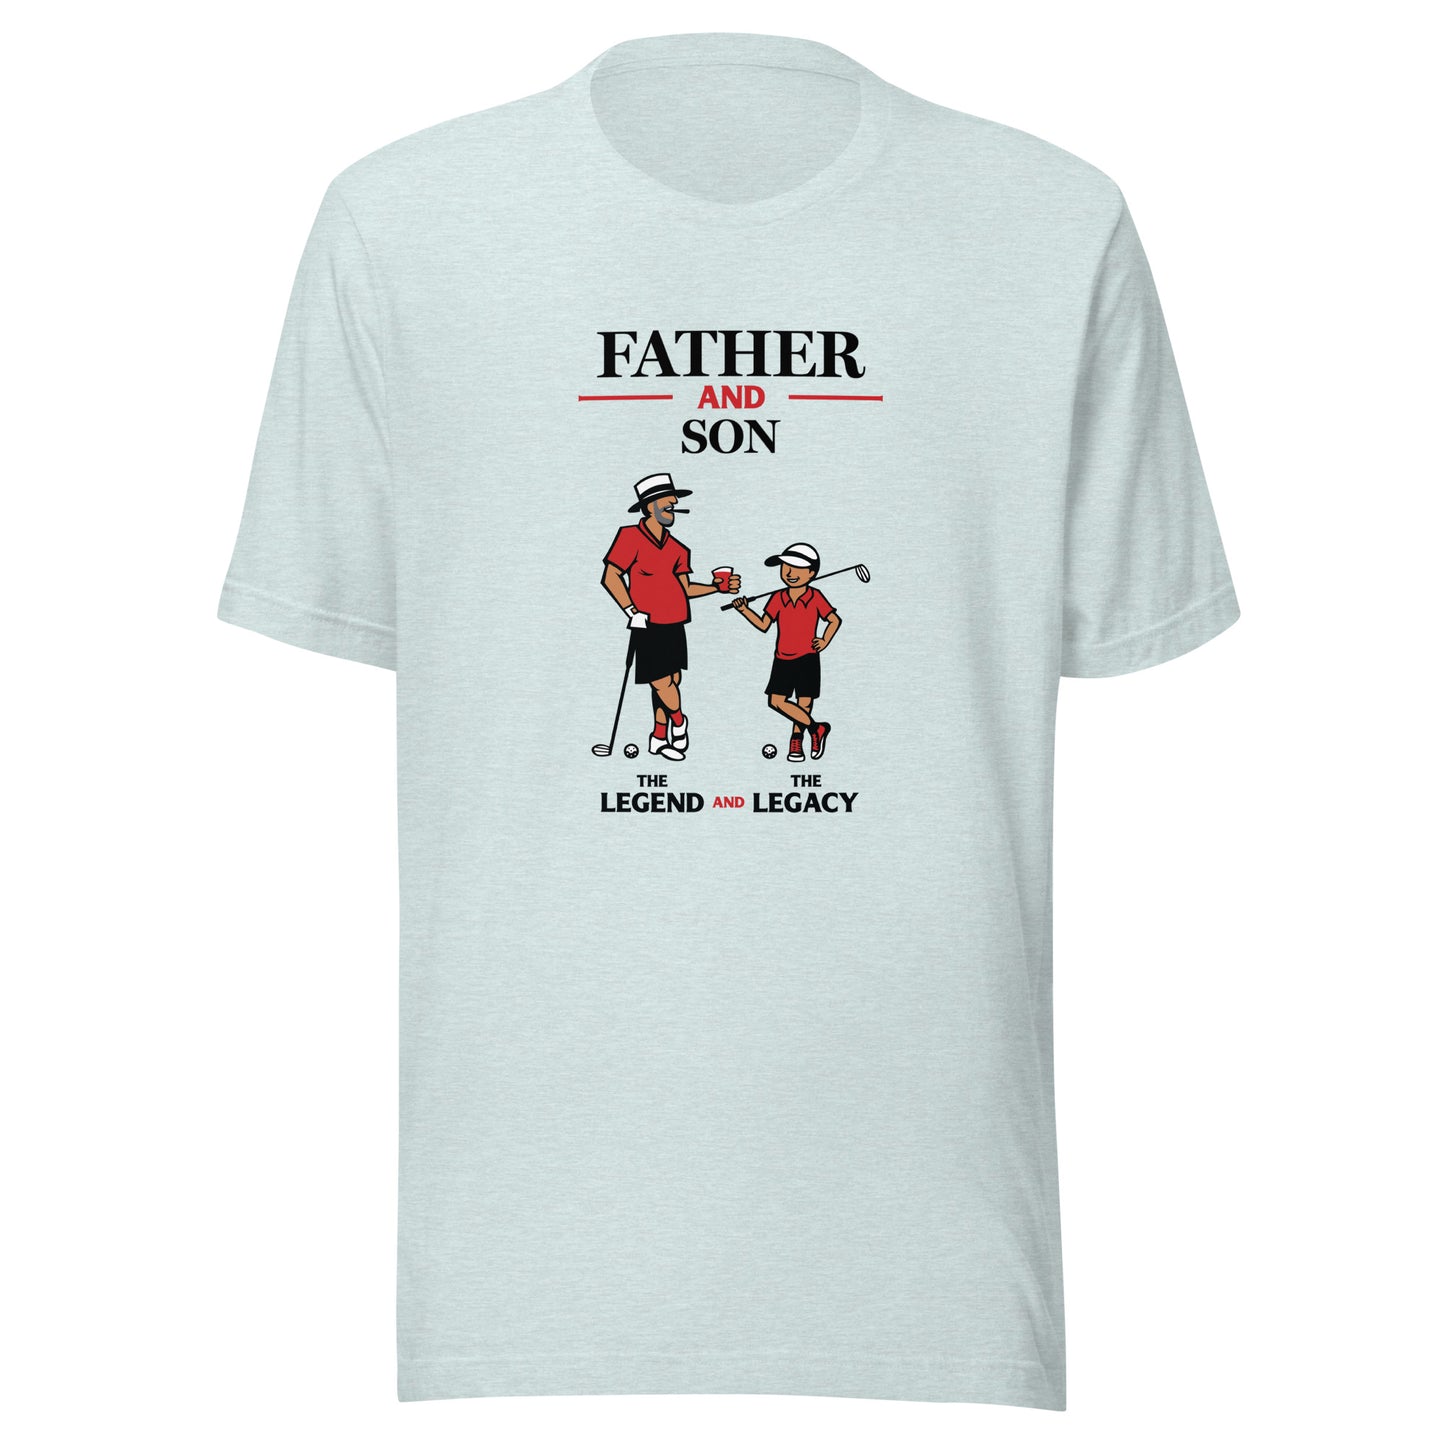 OMG Adult Father/Son Legends t-shirt